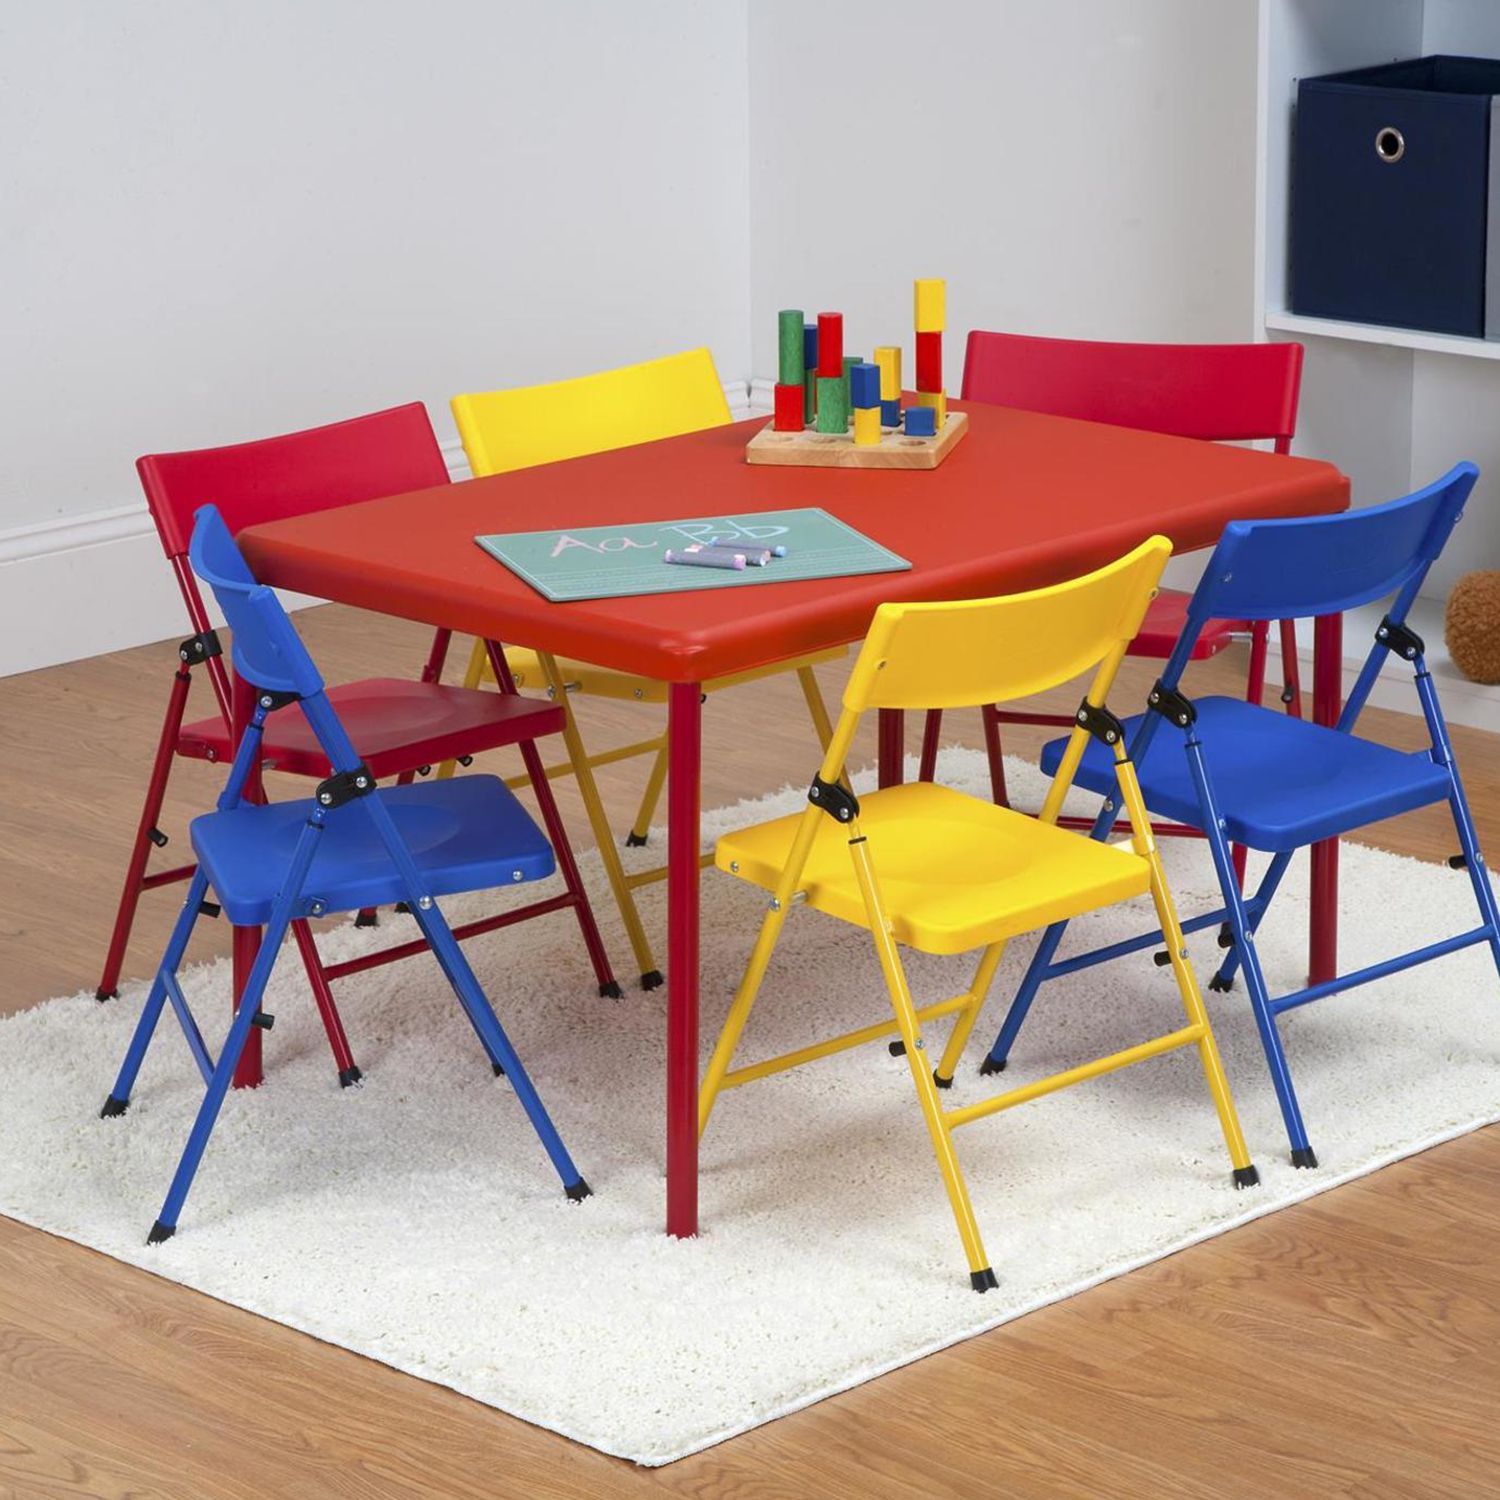 cosco children's folding table and chairs